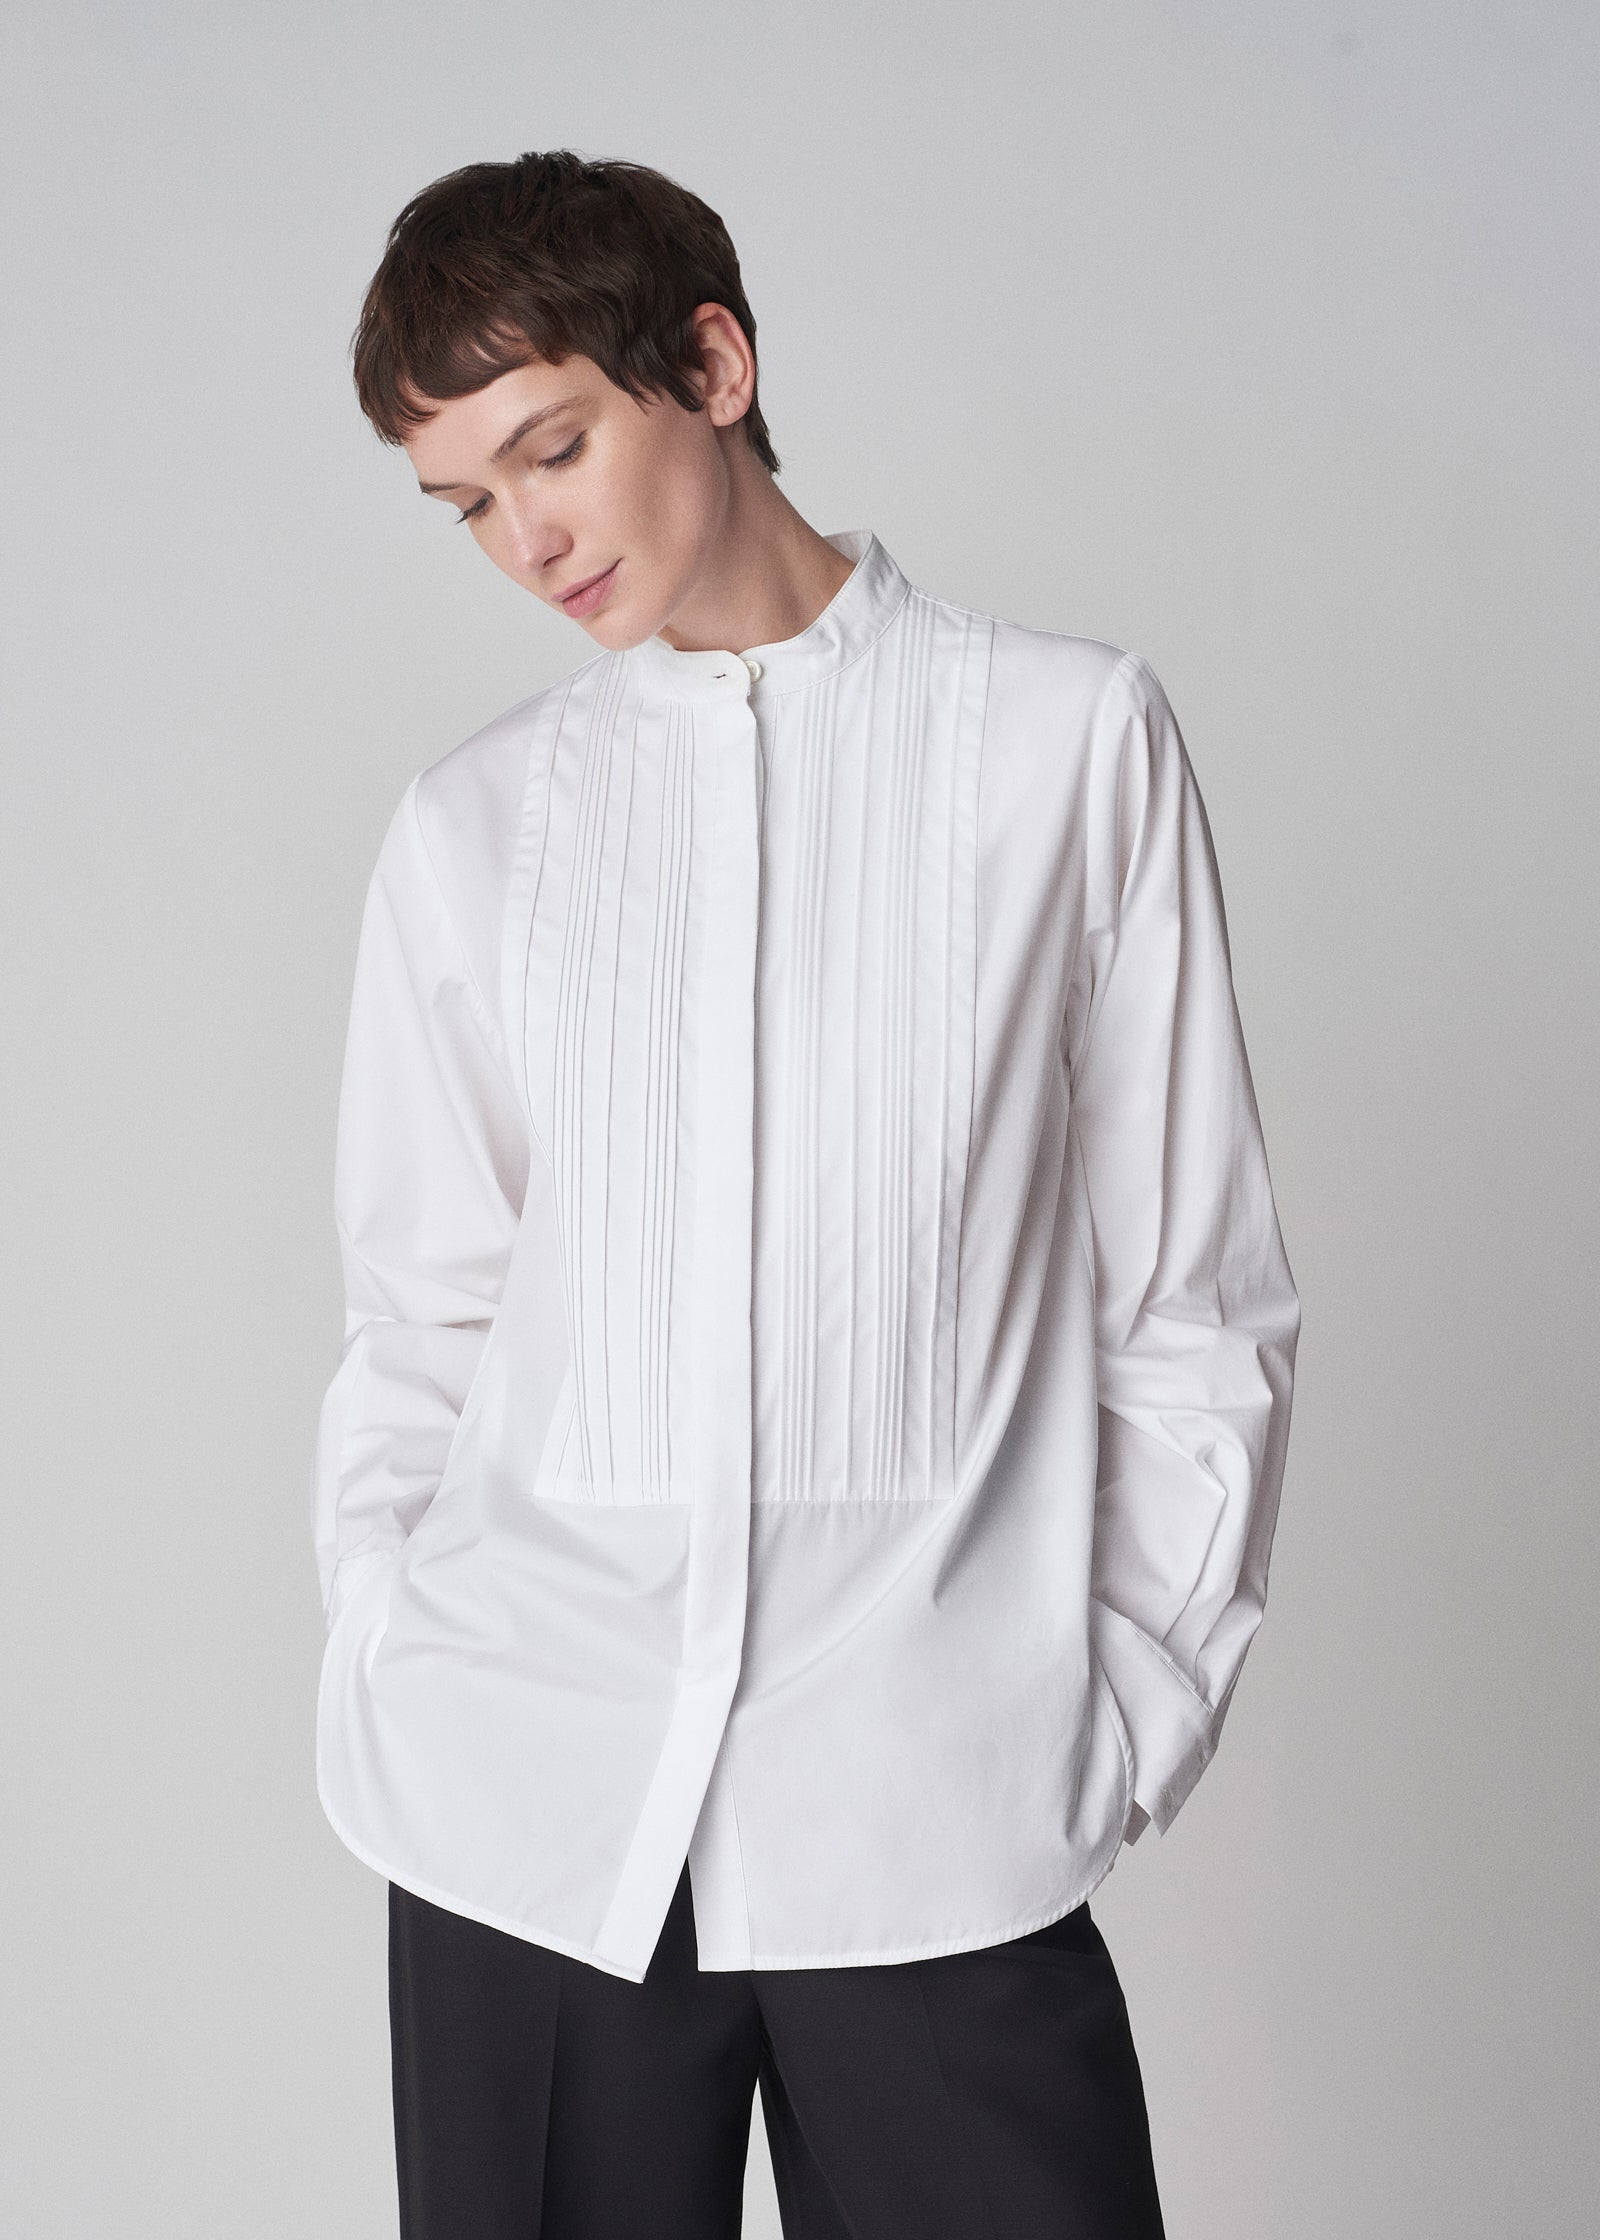 Bib Front Tuxedo Shirt in Cotton - White - CO Collections